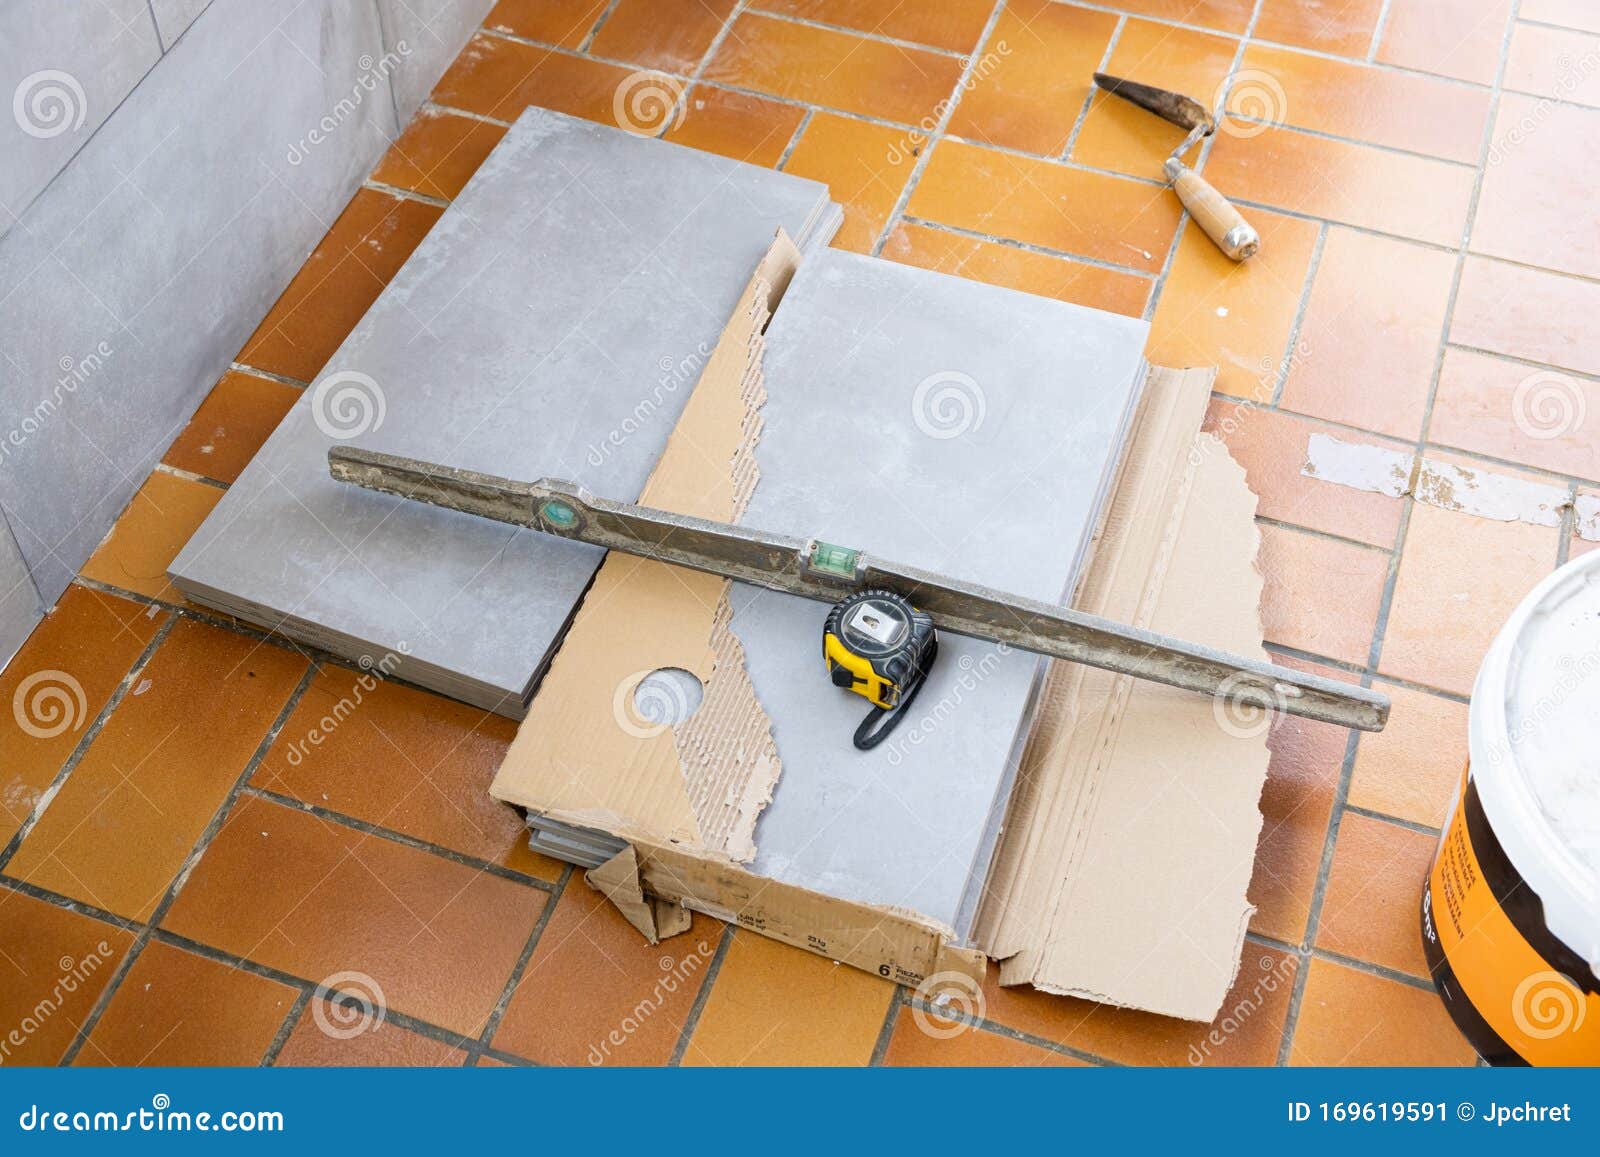  Ceramic Tile Installation  Site With Its Tools Stock Image 